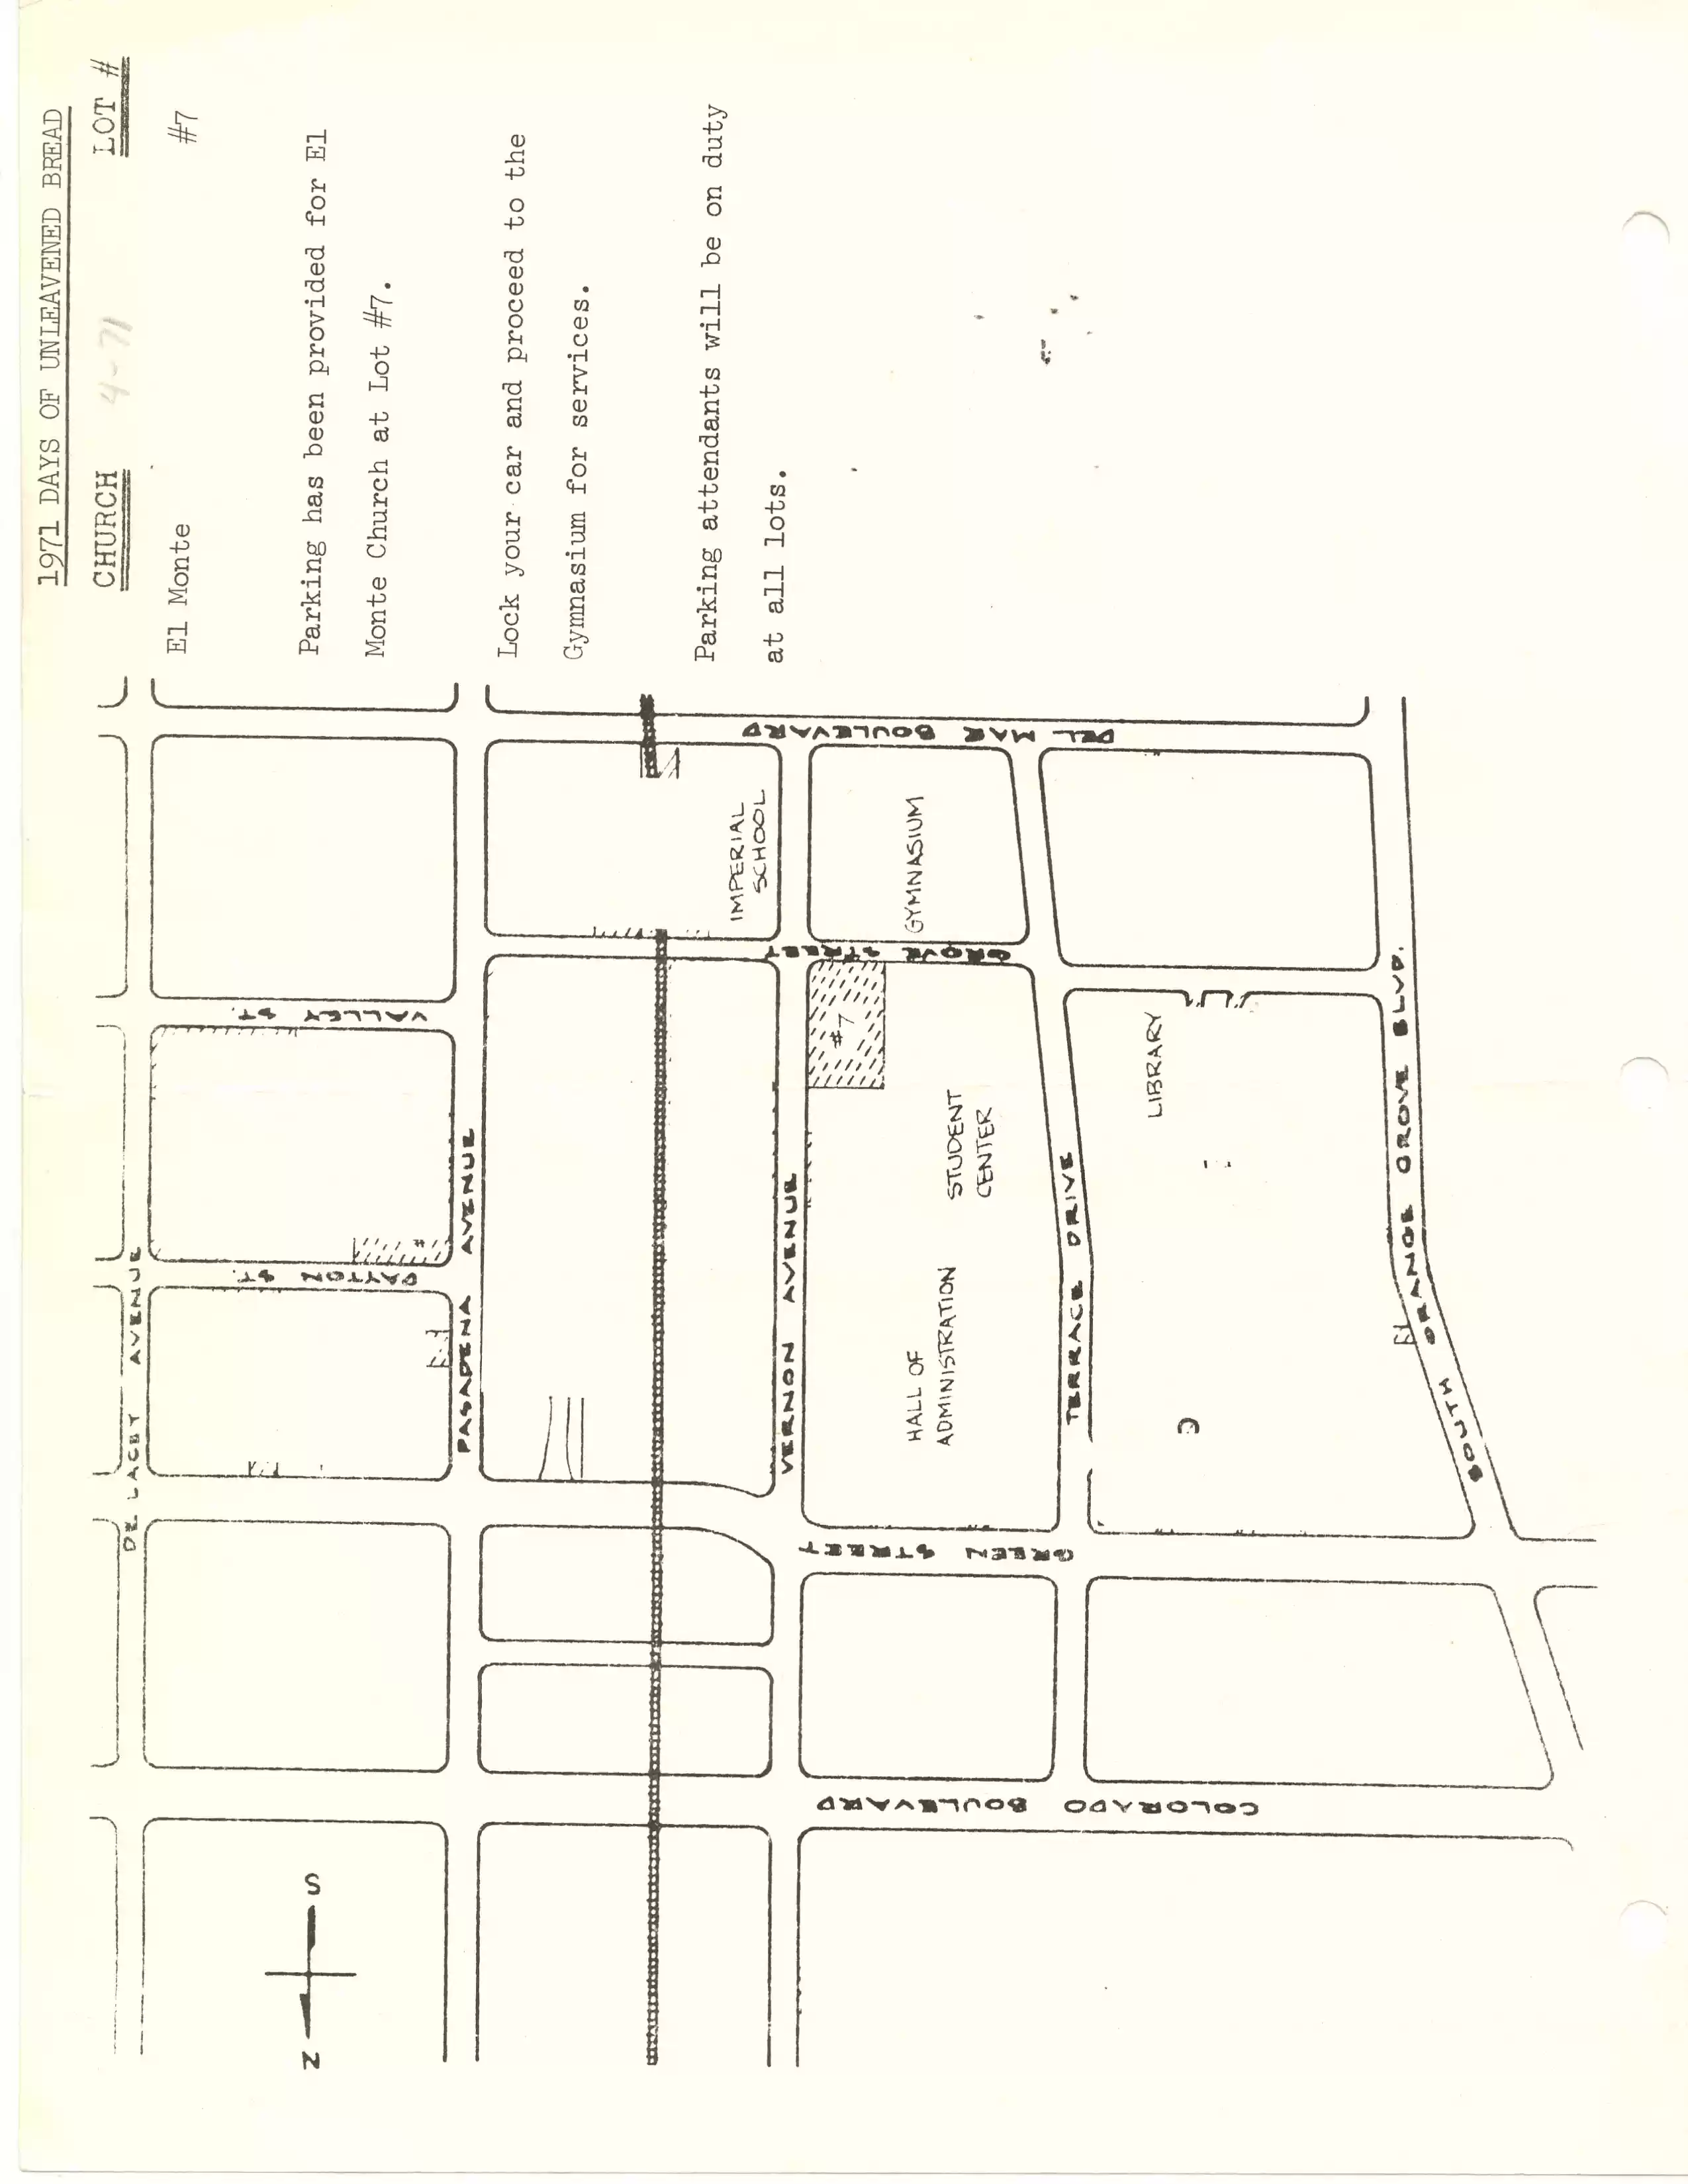 El Monte church parking map at AC for Days of Unleavened Bread, 4-1971